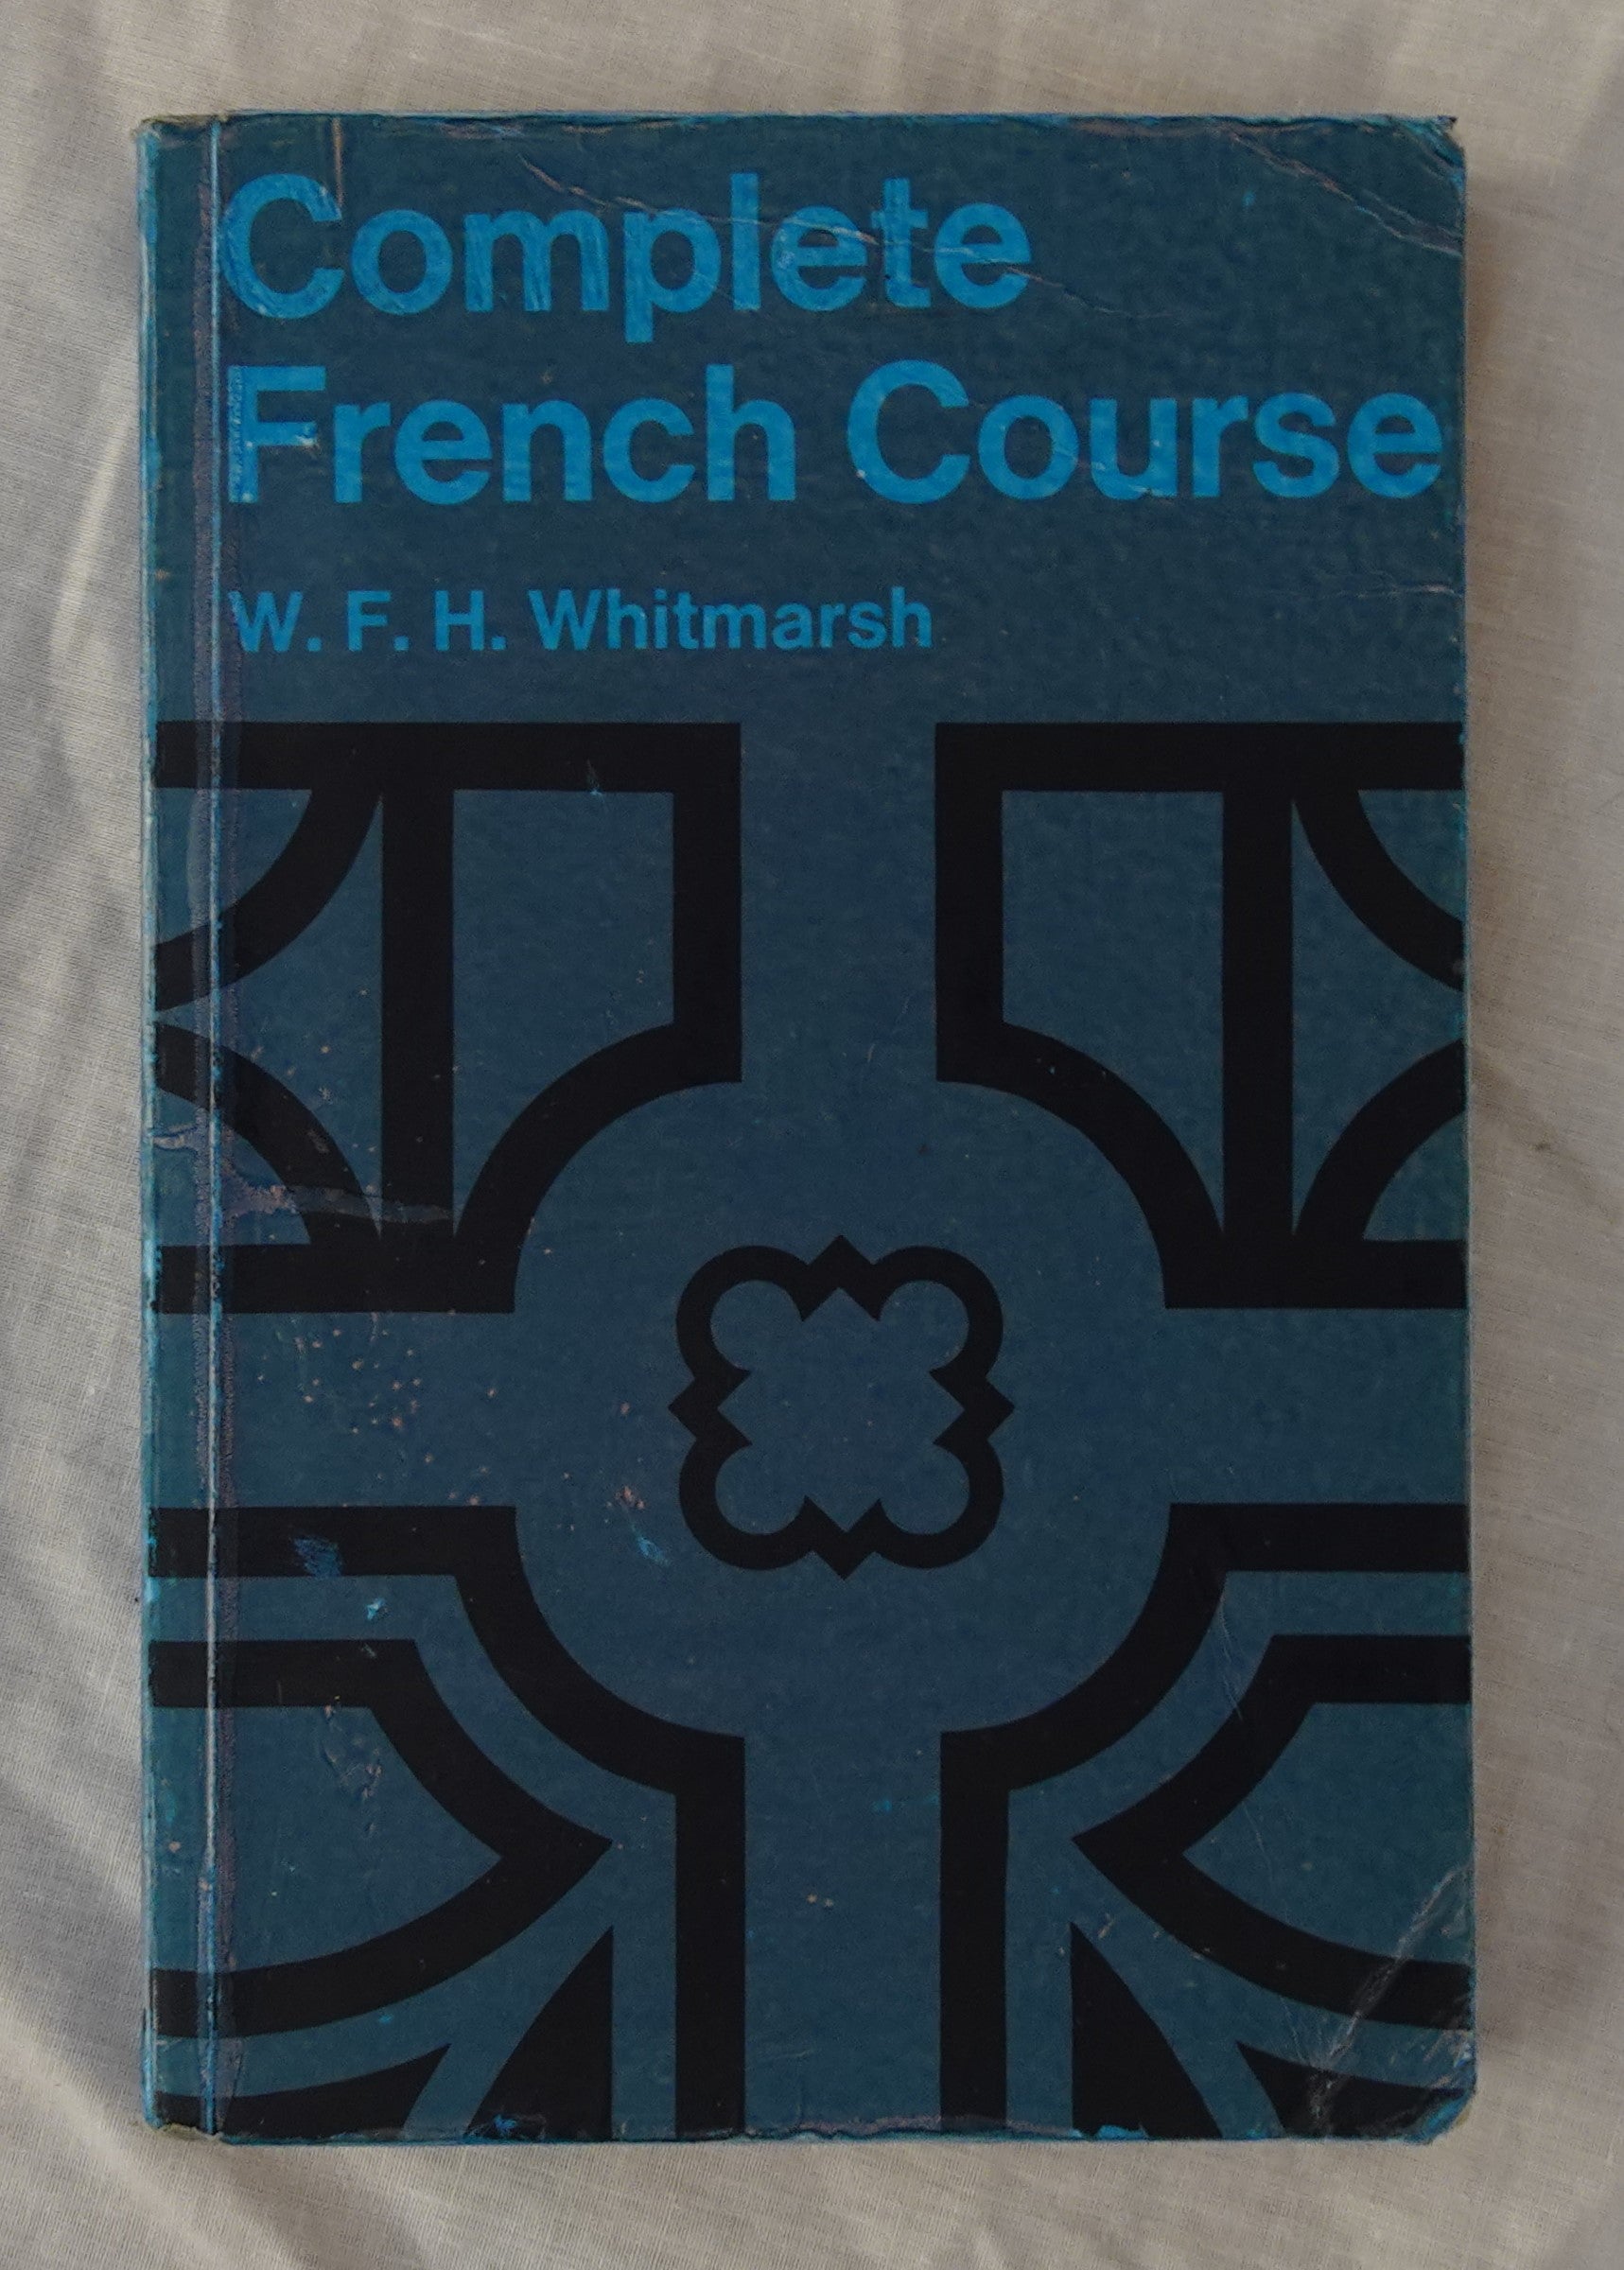 Complete French Course  For First Examinations  by W. F. H. Whitmarsh